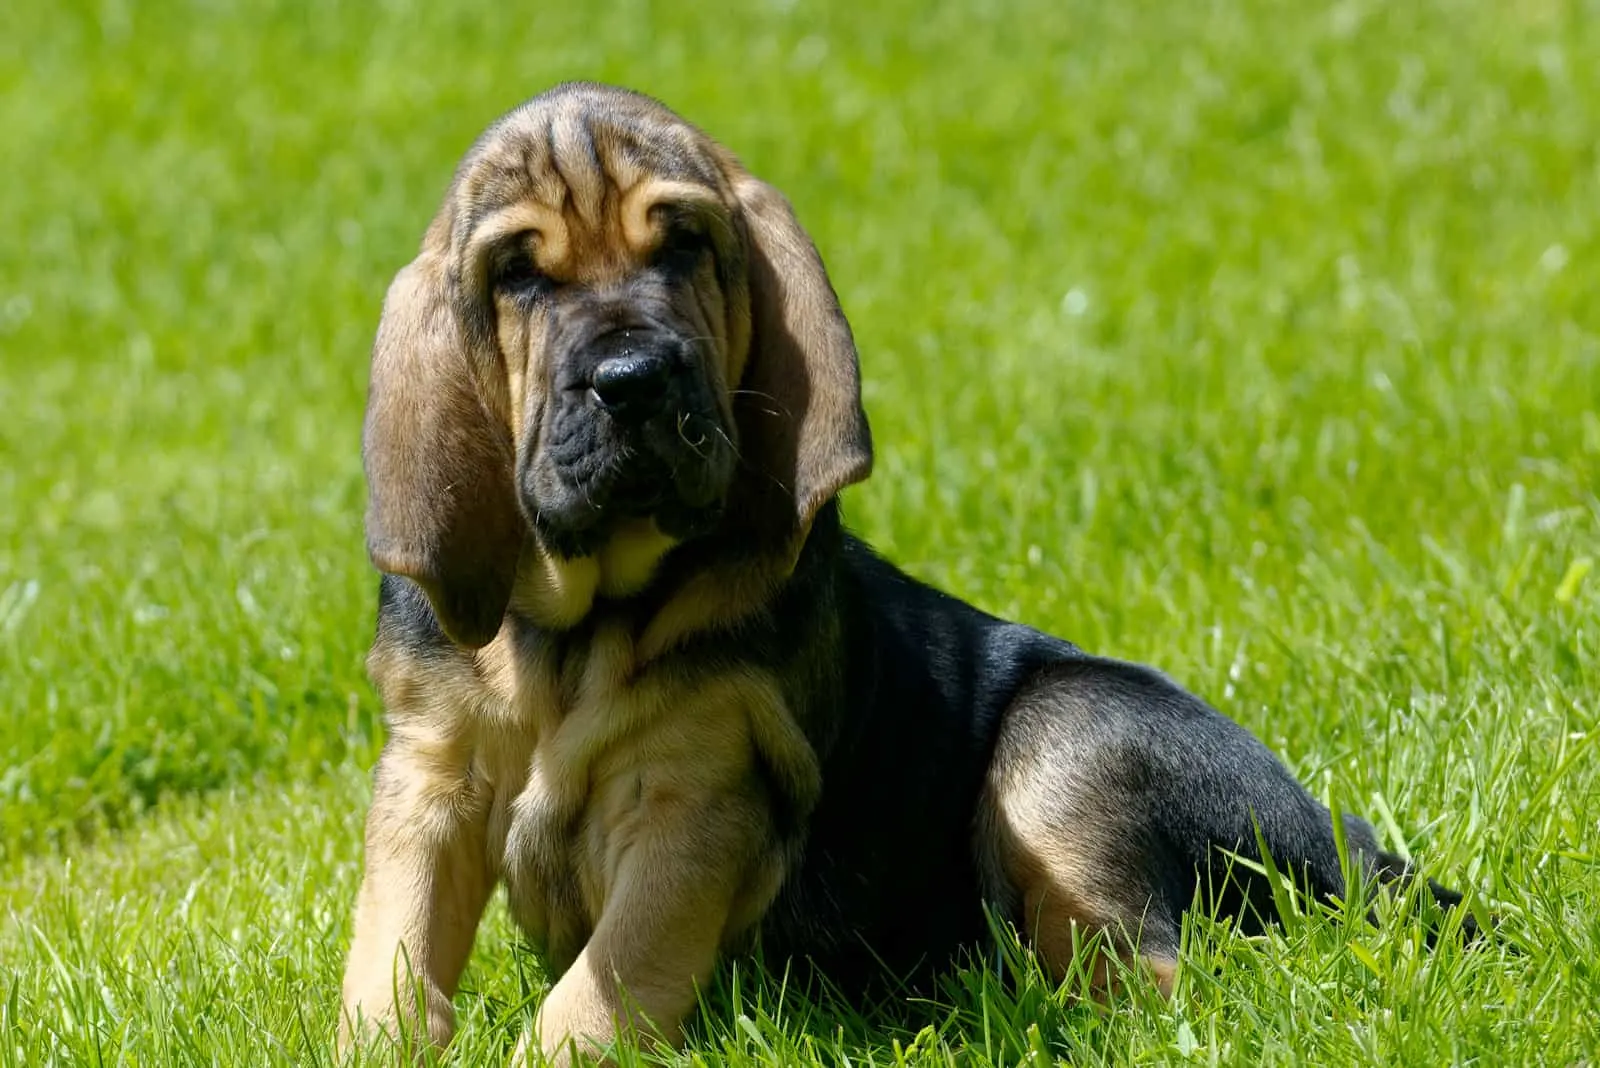 Bloodhound Puppy is lying in the grass